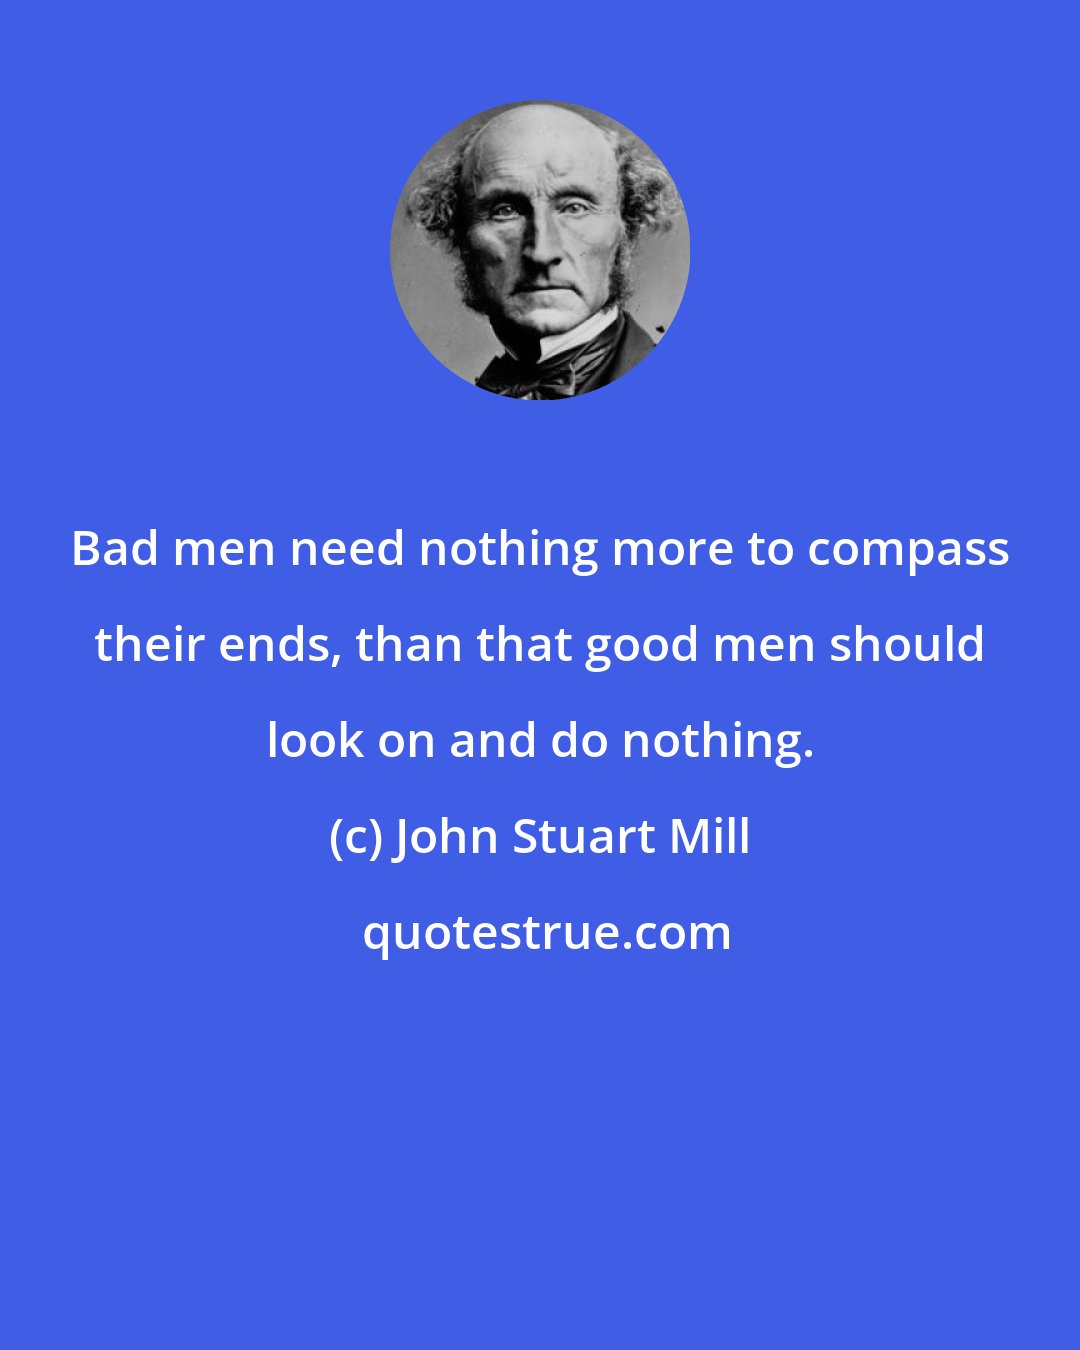 John Stuart Mill: Bad men need nothing more to compass their ends, than that good men should look on and do nothing.